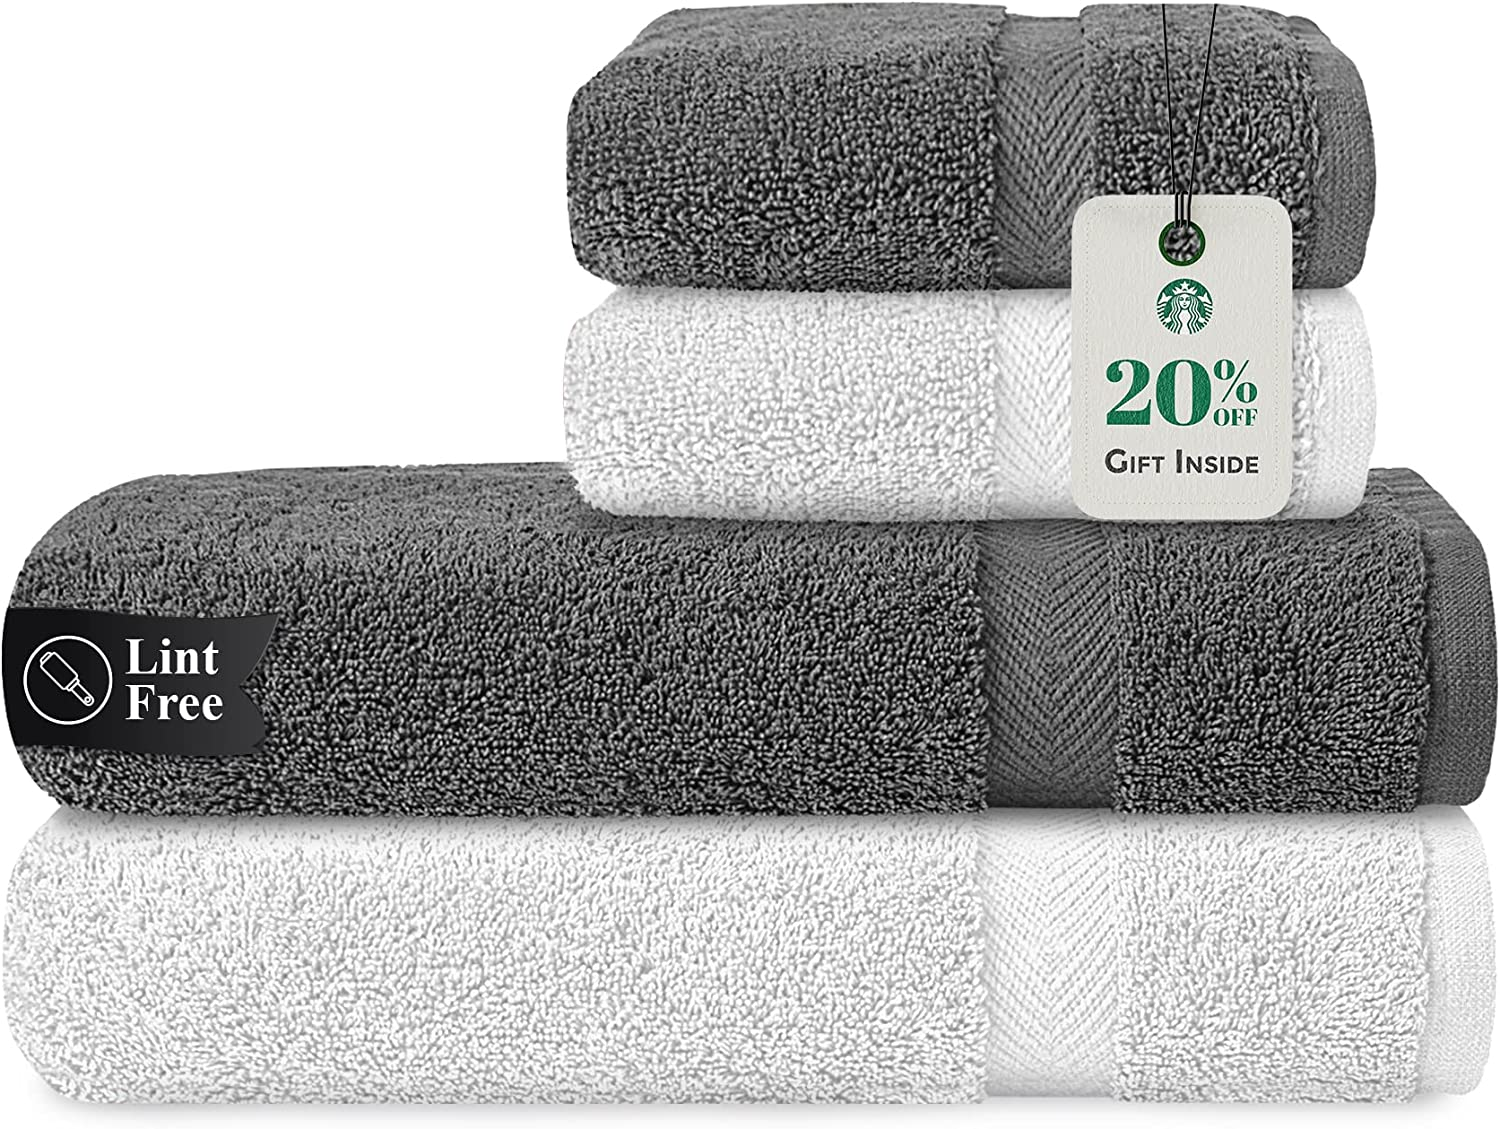 Stony Edge Towel Set, 2 Bath Towels & 2 Hand Towels, 100% Cotton, 600 GSM, Soft & Absorbent for Bathroom, Kitchen, Gym & Spa, White &  Navy Blue